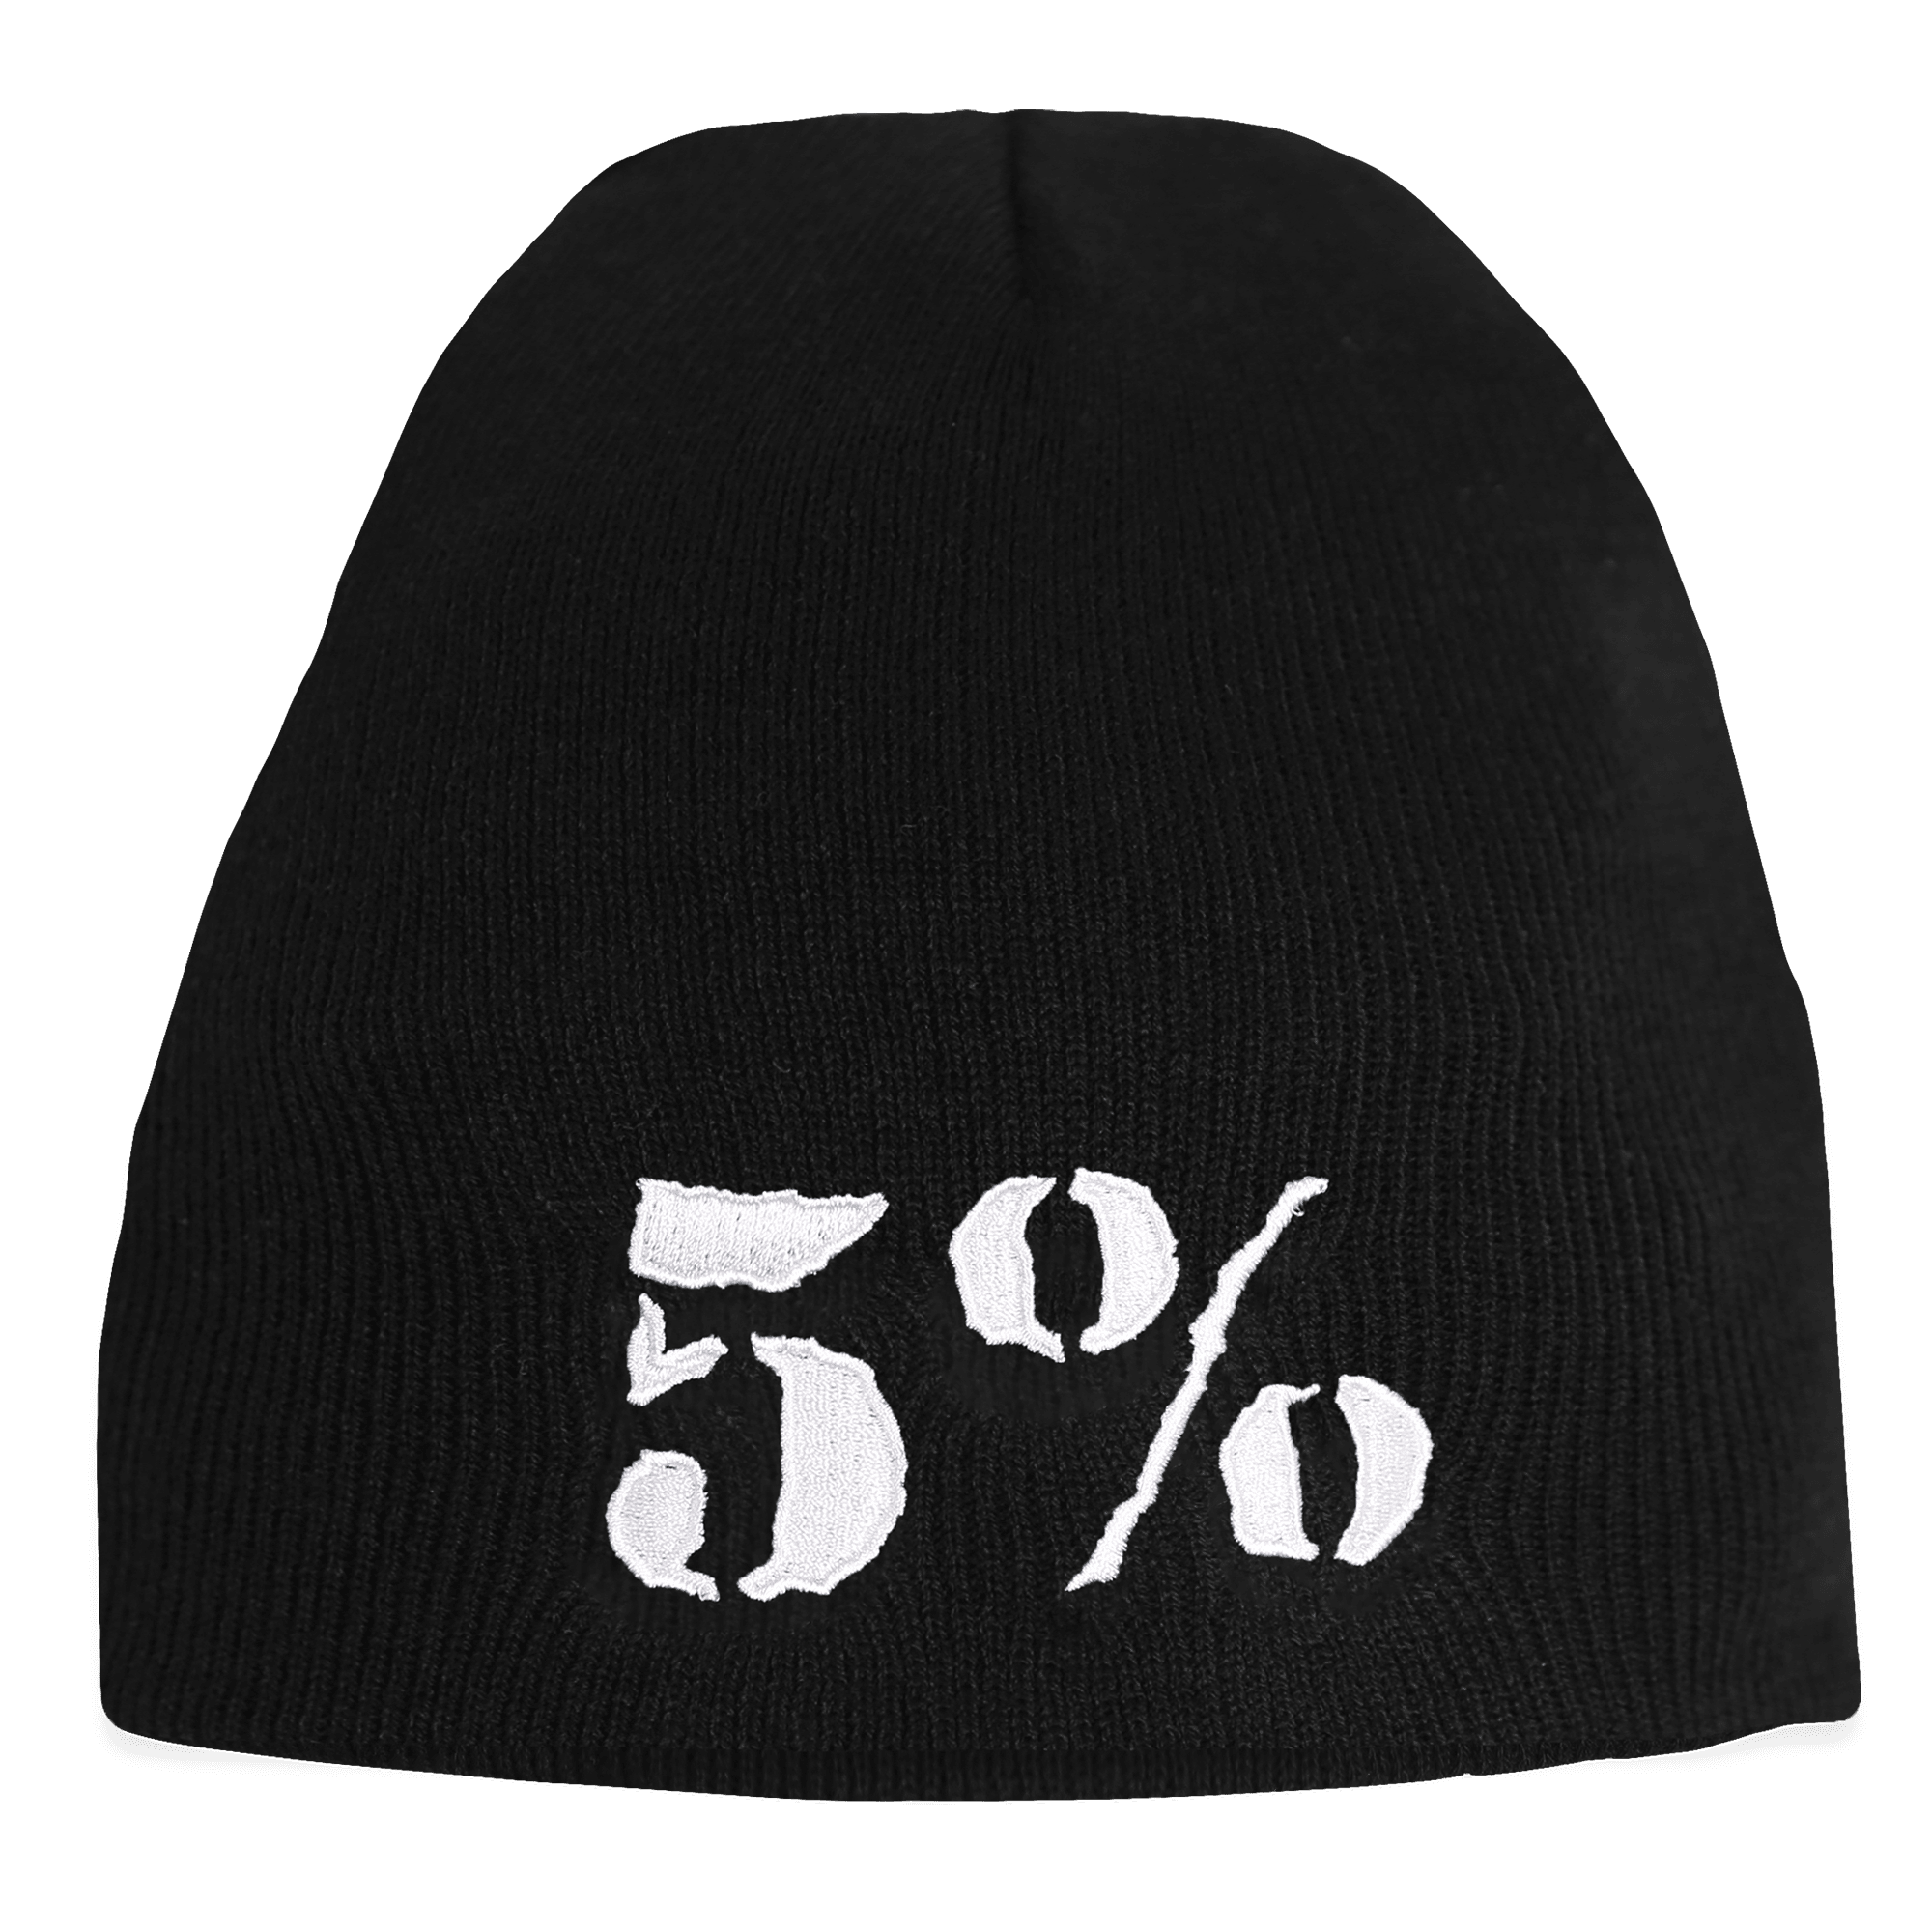 5% Black Beanie with White Lettering (intl) - 5% Nutrition